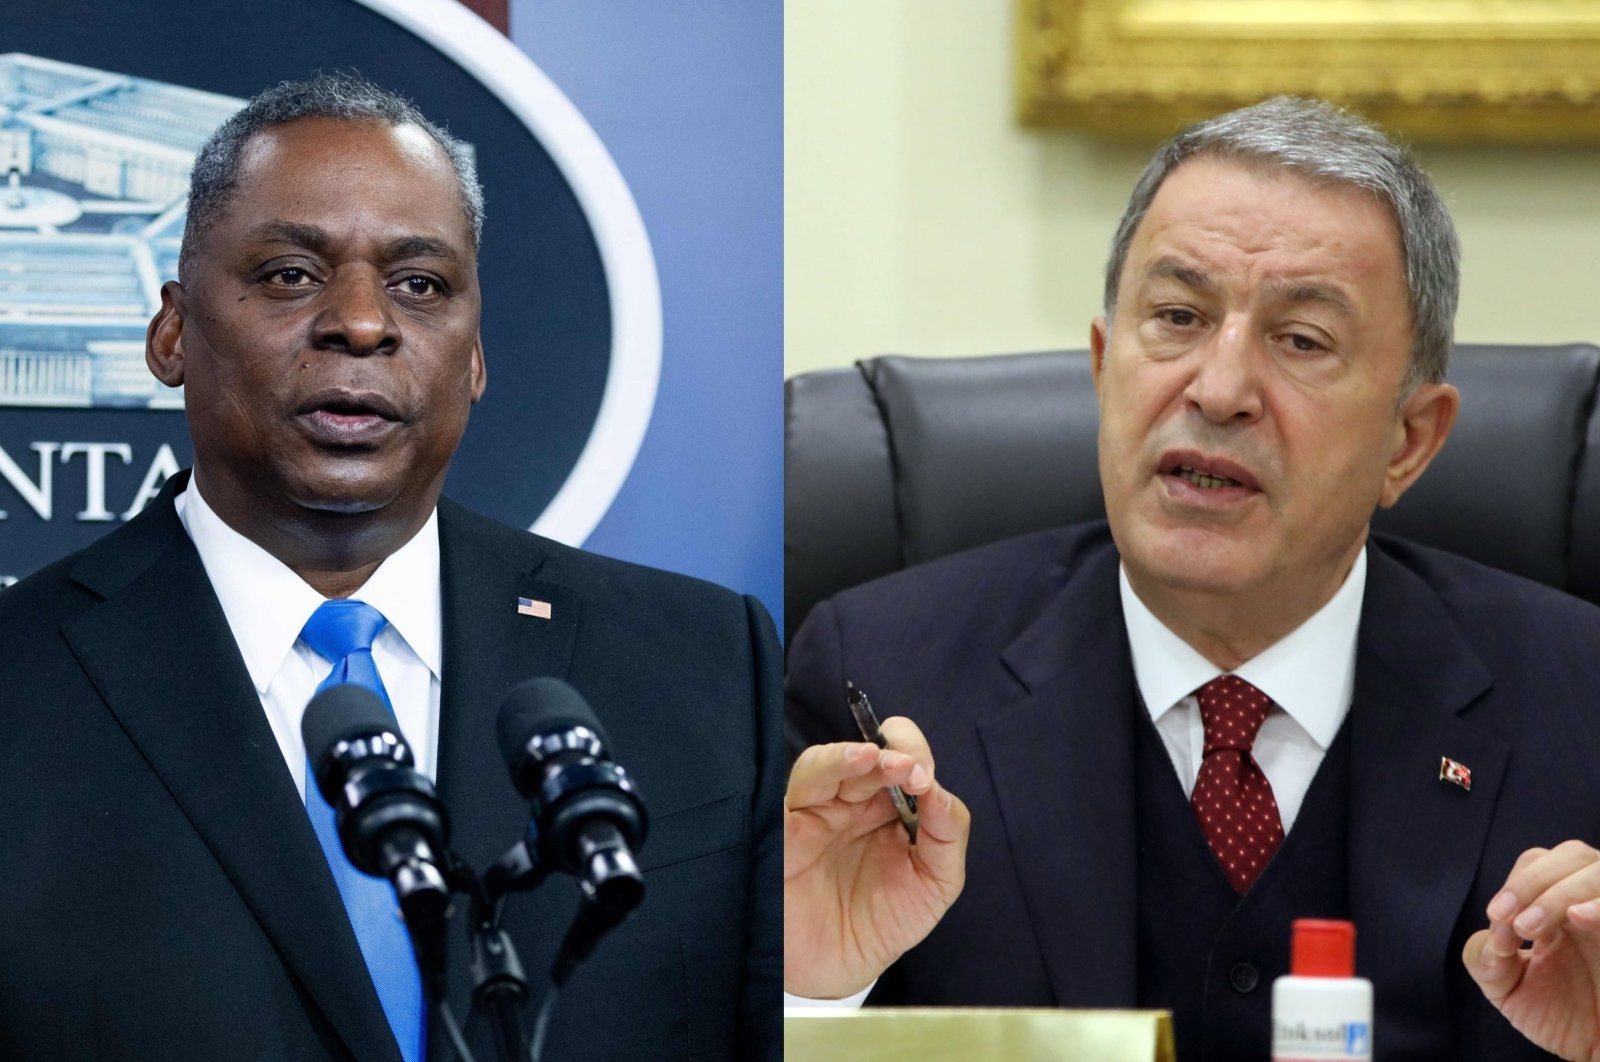 This photo combination shows U.S. Secretary of Defense Lloyd Austin (L) at the Pentagon, Virginia, U.S., on Feb. 10, 2021, and Minister of National Defense Hulusi Akar at the Defense Ministry, Ankara, Turkey, on May 29, 2020. (Photos by AFP, AA, File)